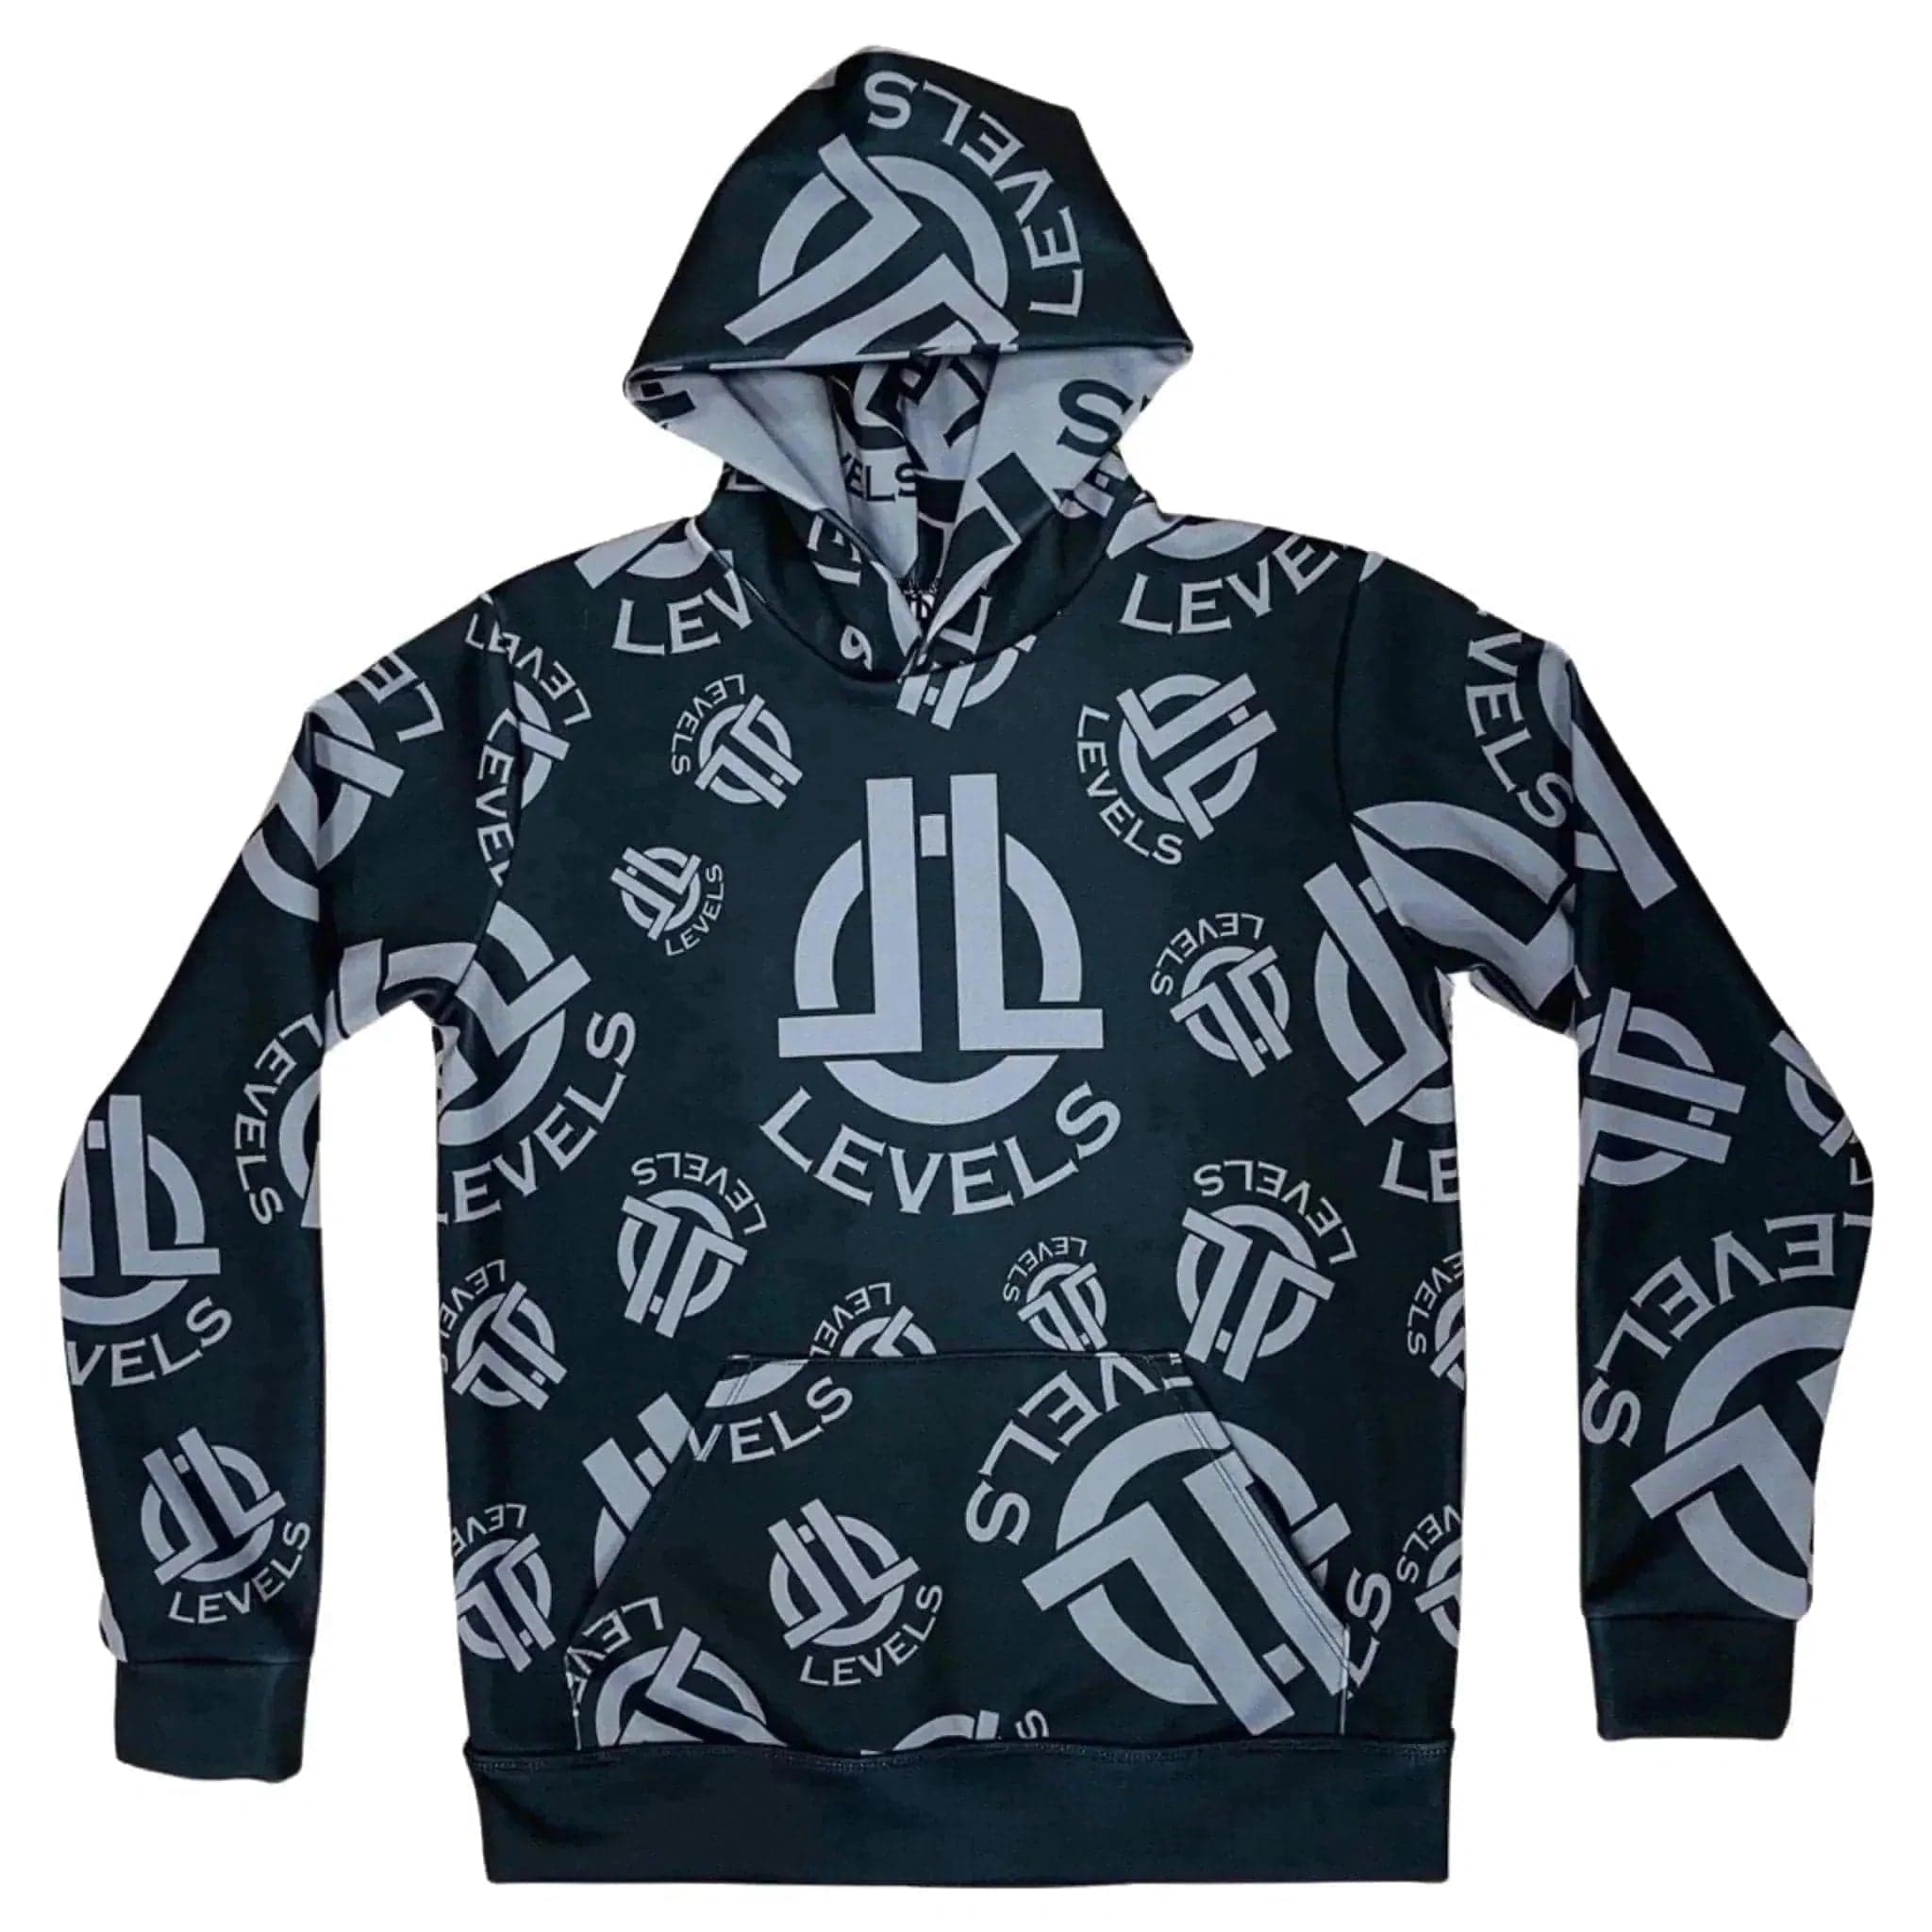 LEVELS, LLC Apparel & Accessories DYE SUBLIMATION HOODIE (BLACK/CHARCOAL) 2ND EDITION